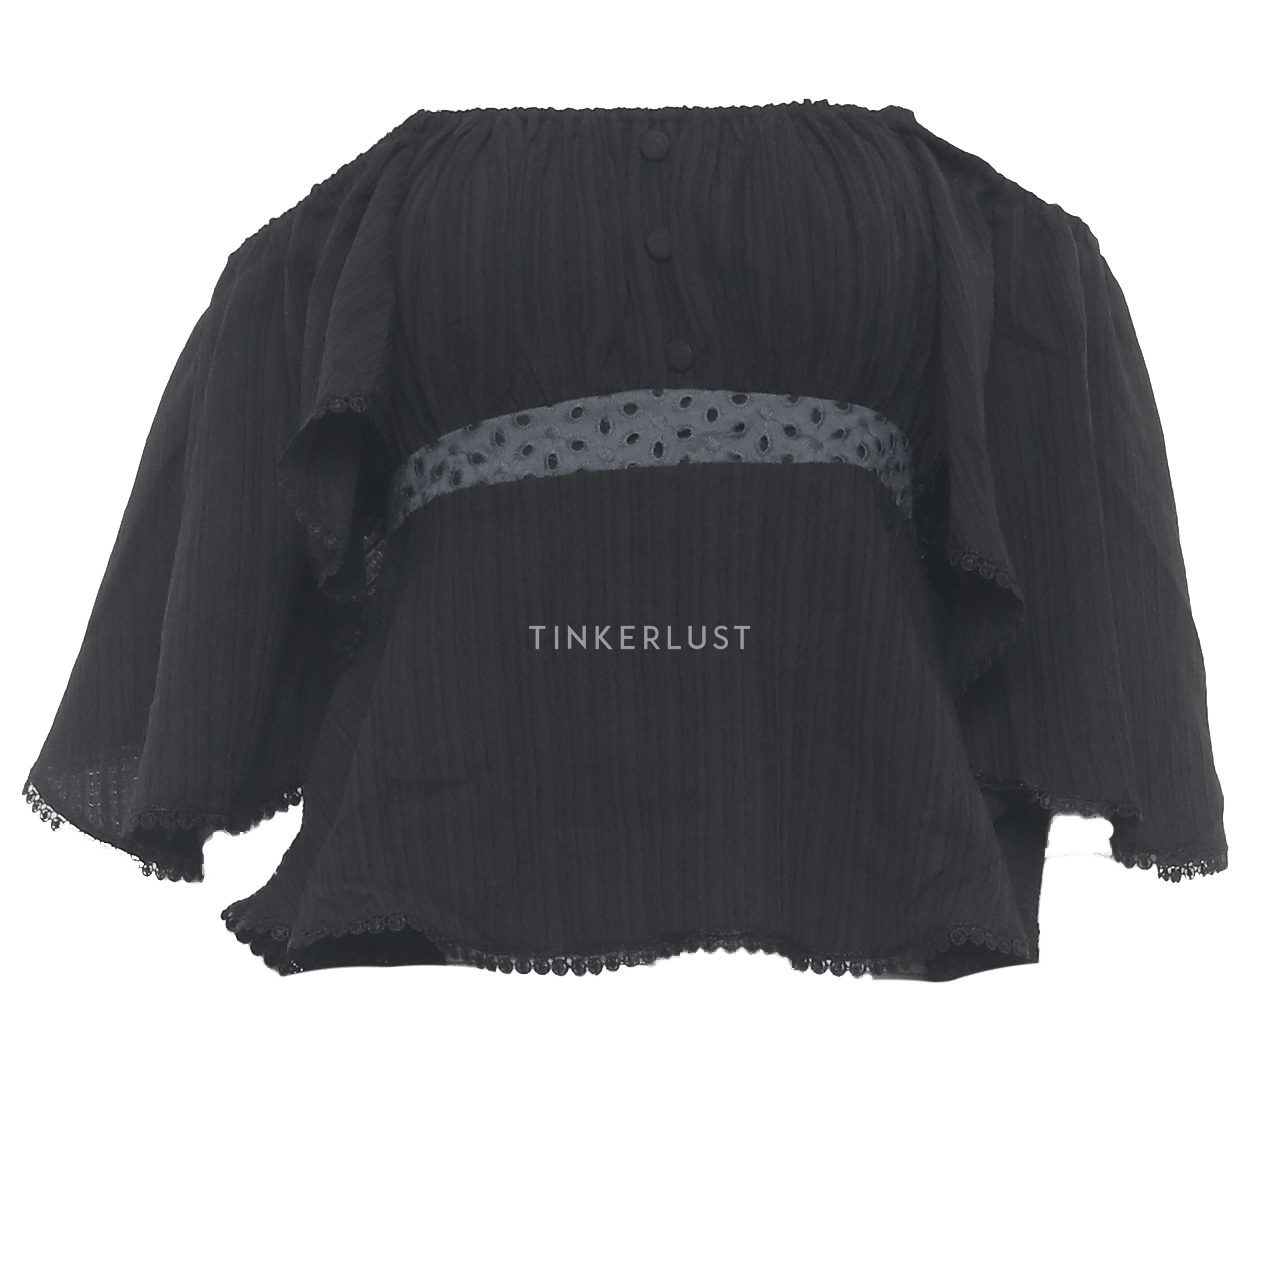 With Love x Stella Lee Black Blouse